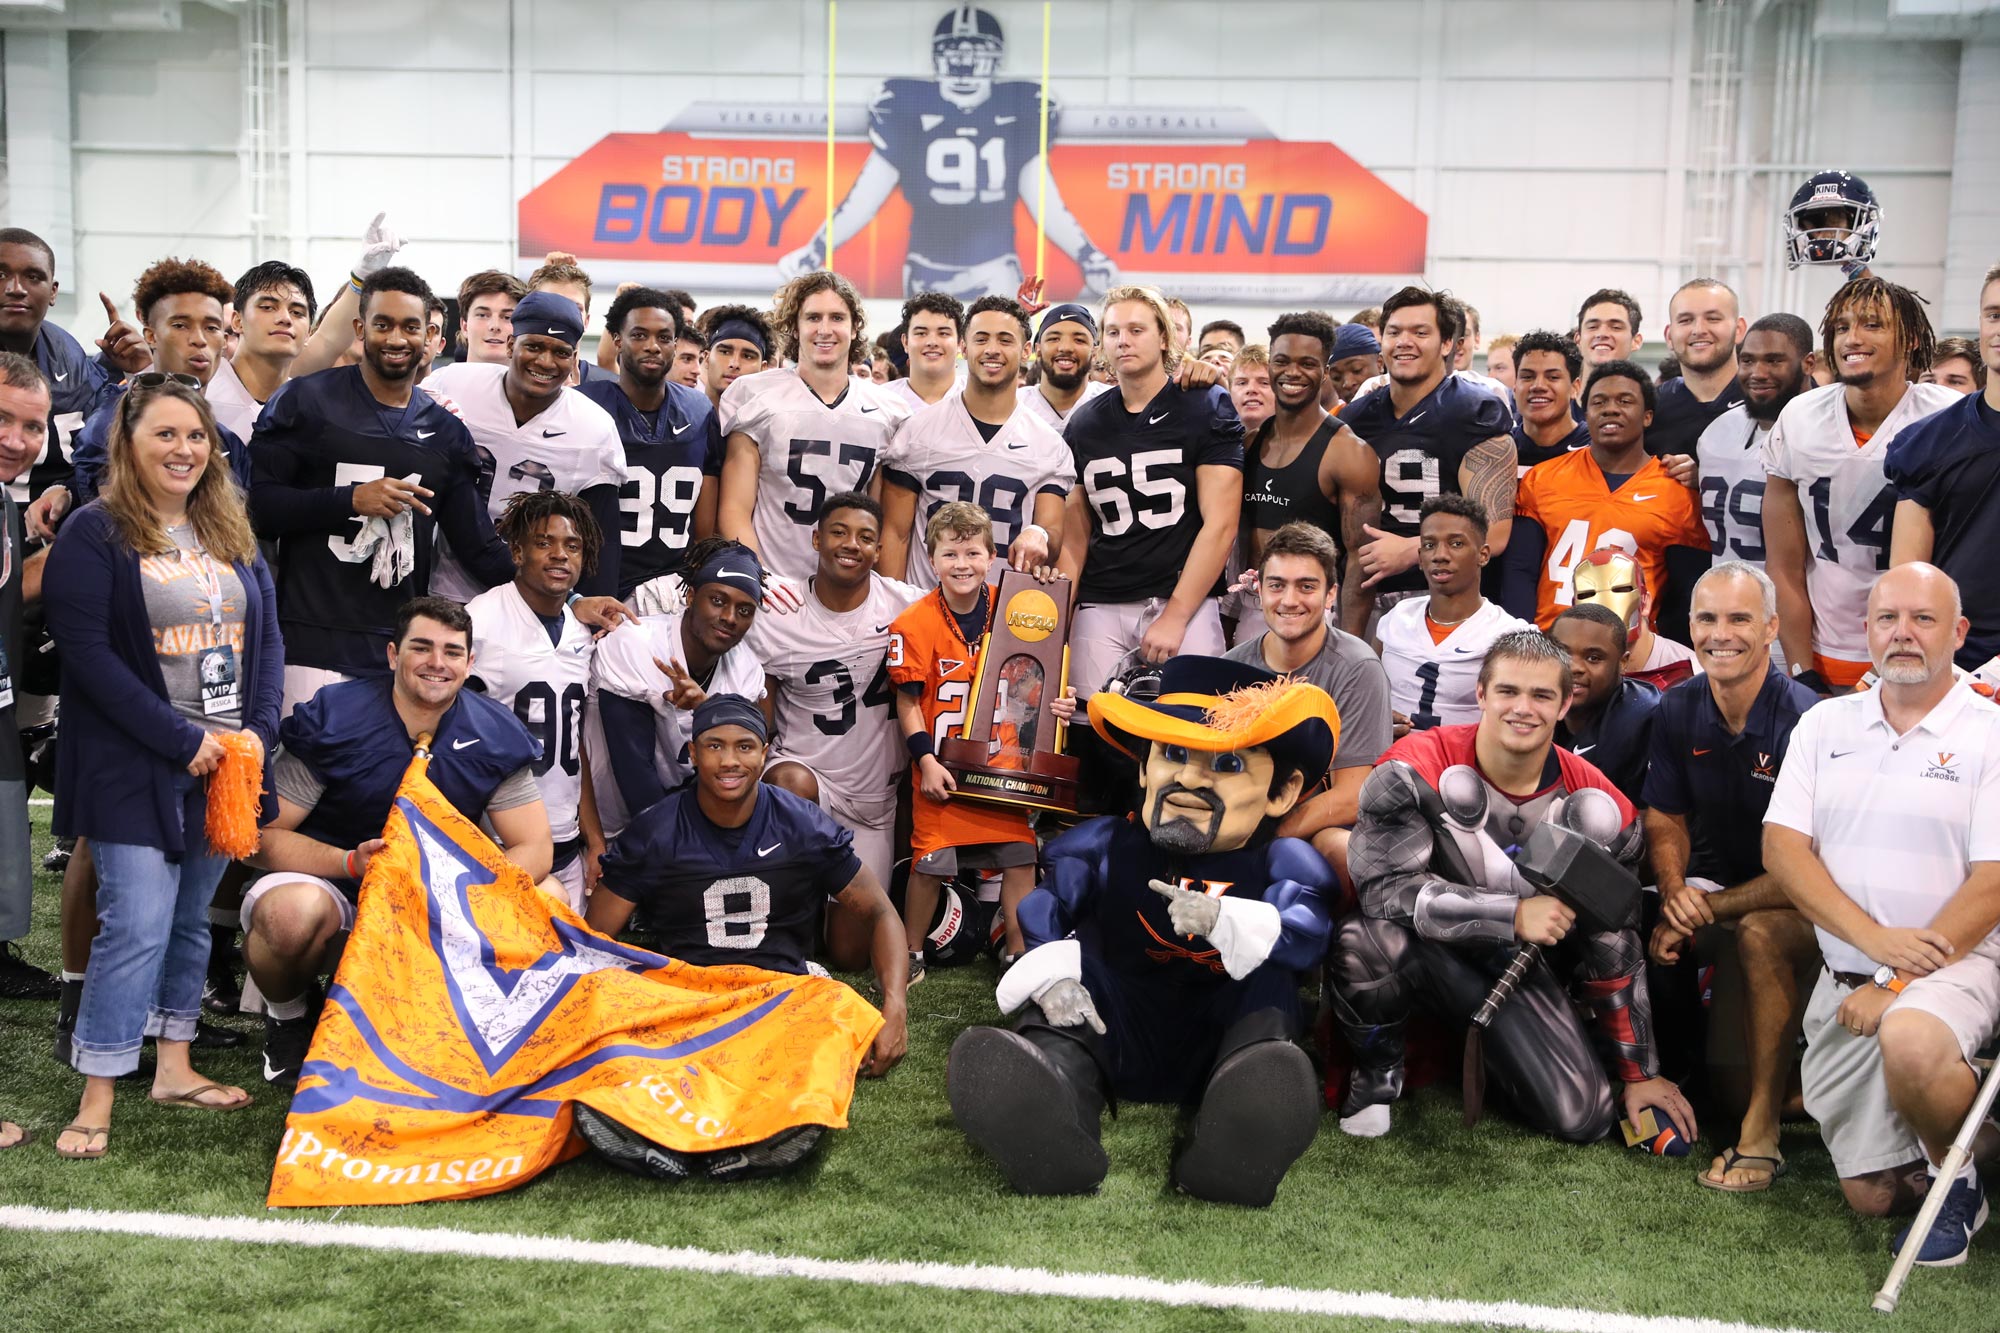 The UVA football program poses with children for a picture